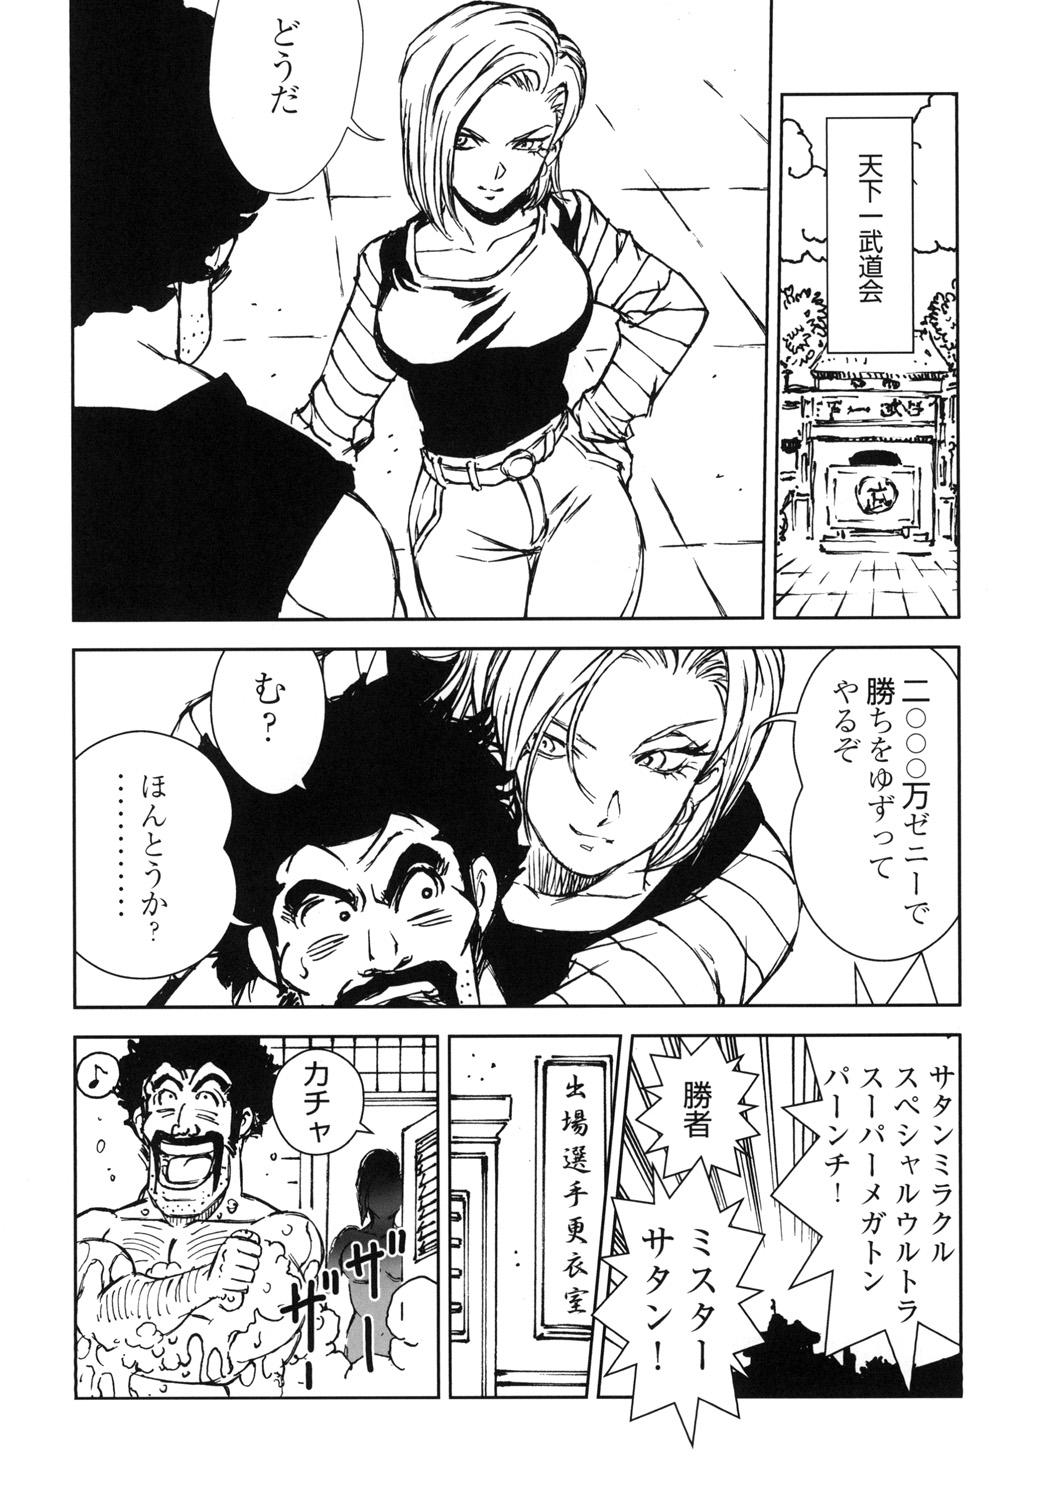 Boss 18+ - Dragon ball z Red Head - Page 5